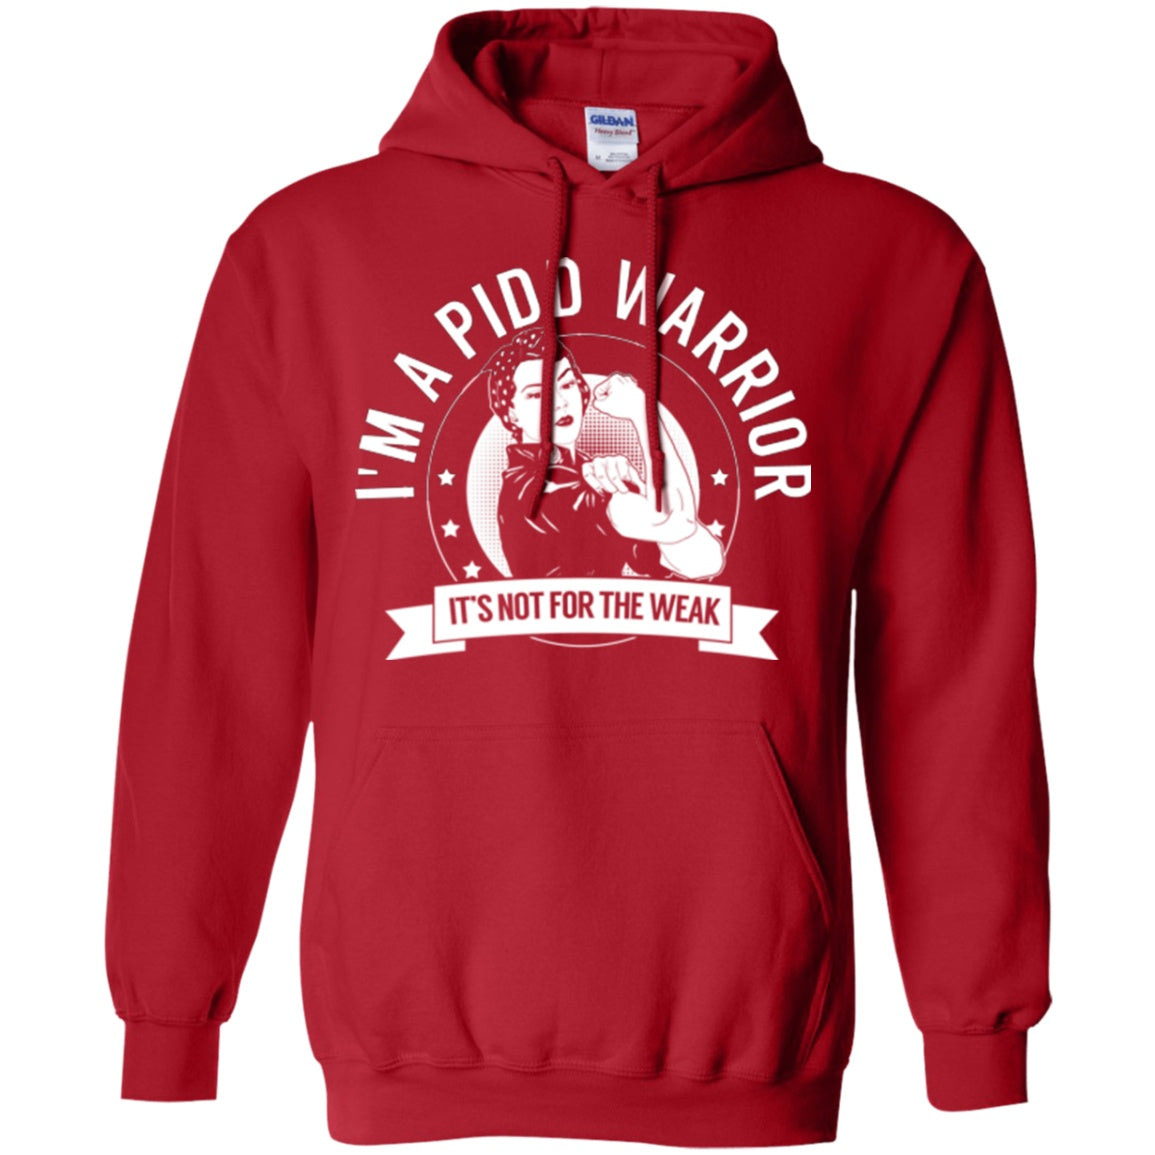 Primary Immunodeficiency Diseases - PIDD Warrior Not For The Weak Pullover Hoodie 8 oz. - The Unchargeables